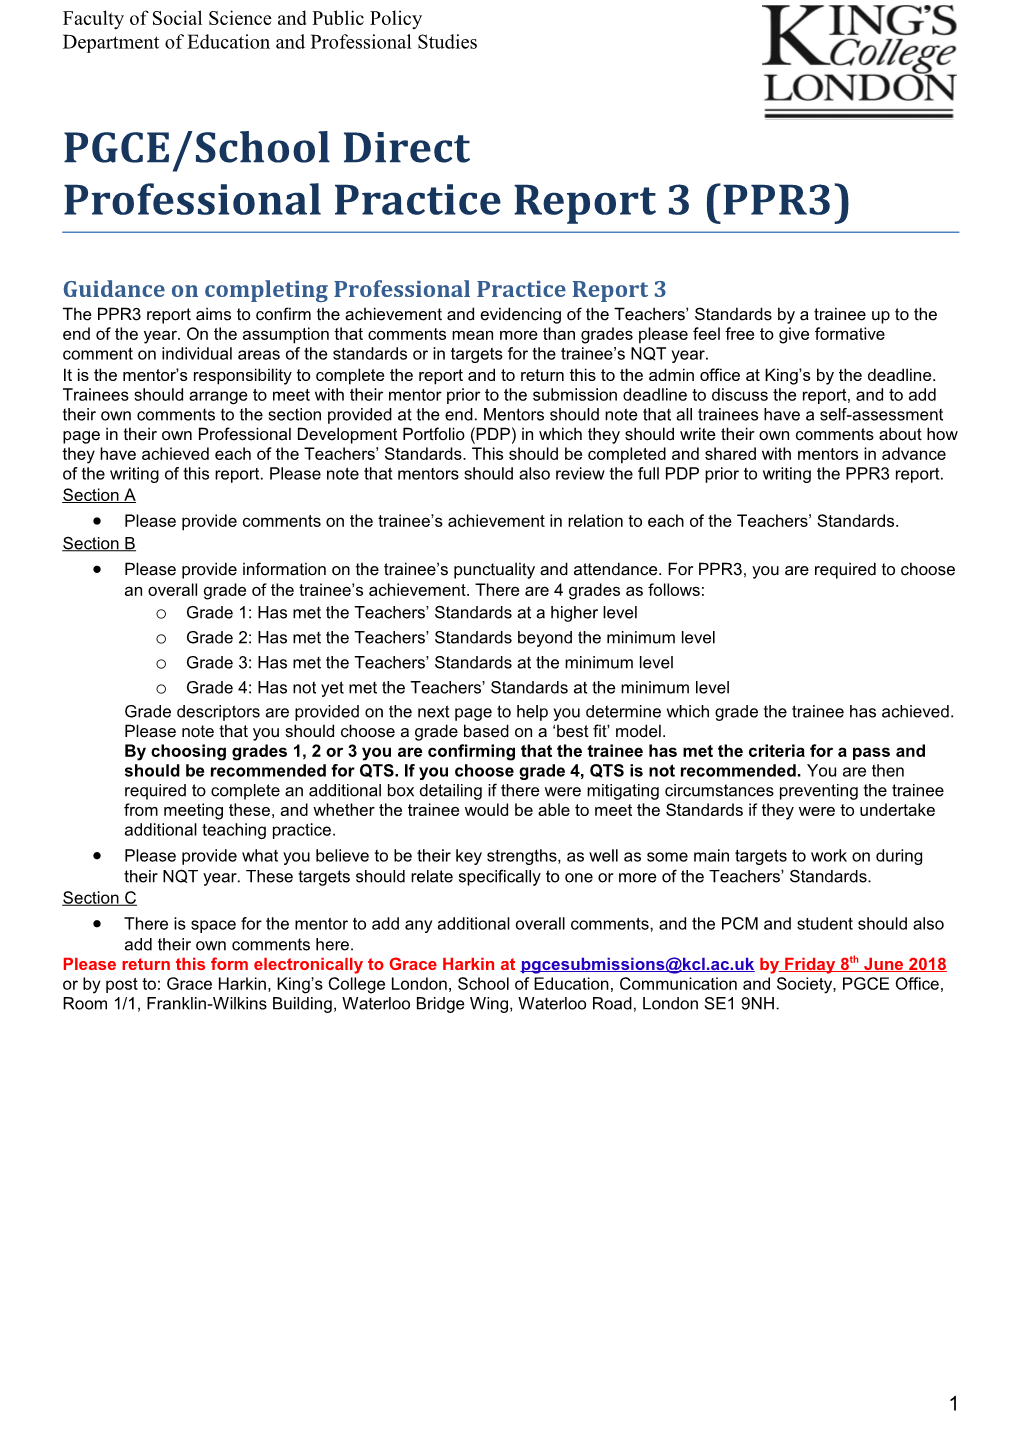 King S College London PGCE/School Direct: Professional Practice Report 3 (PPR3)